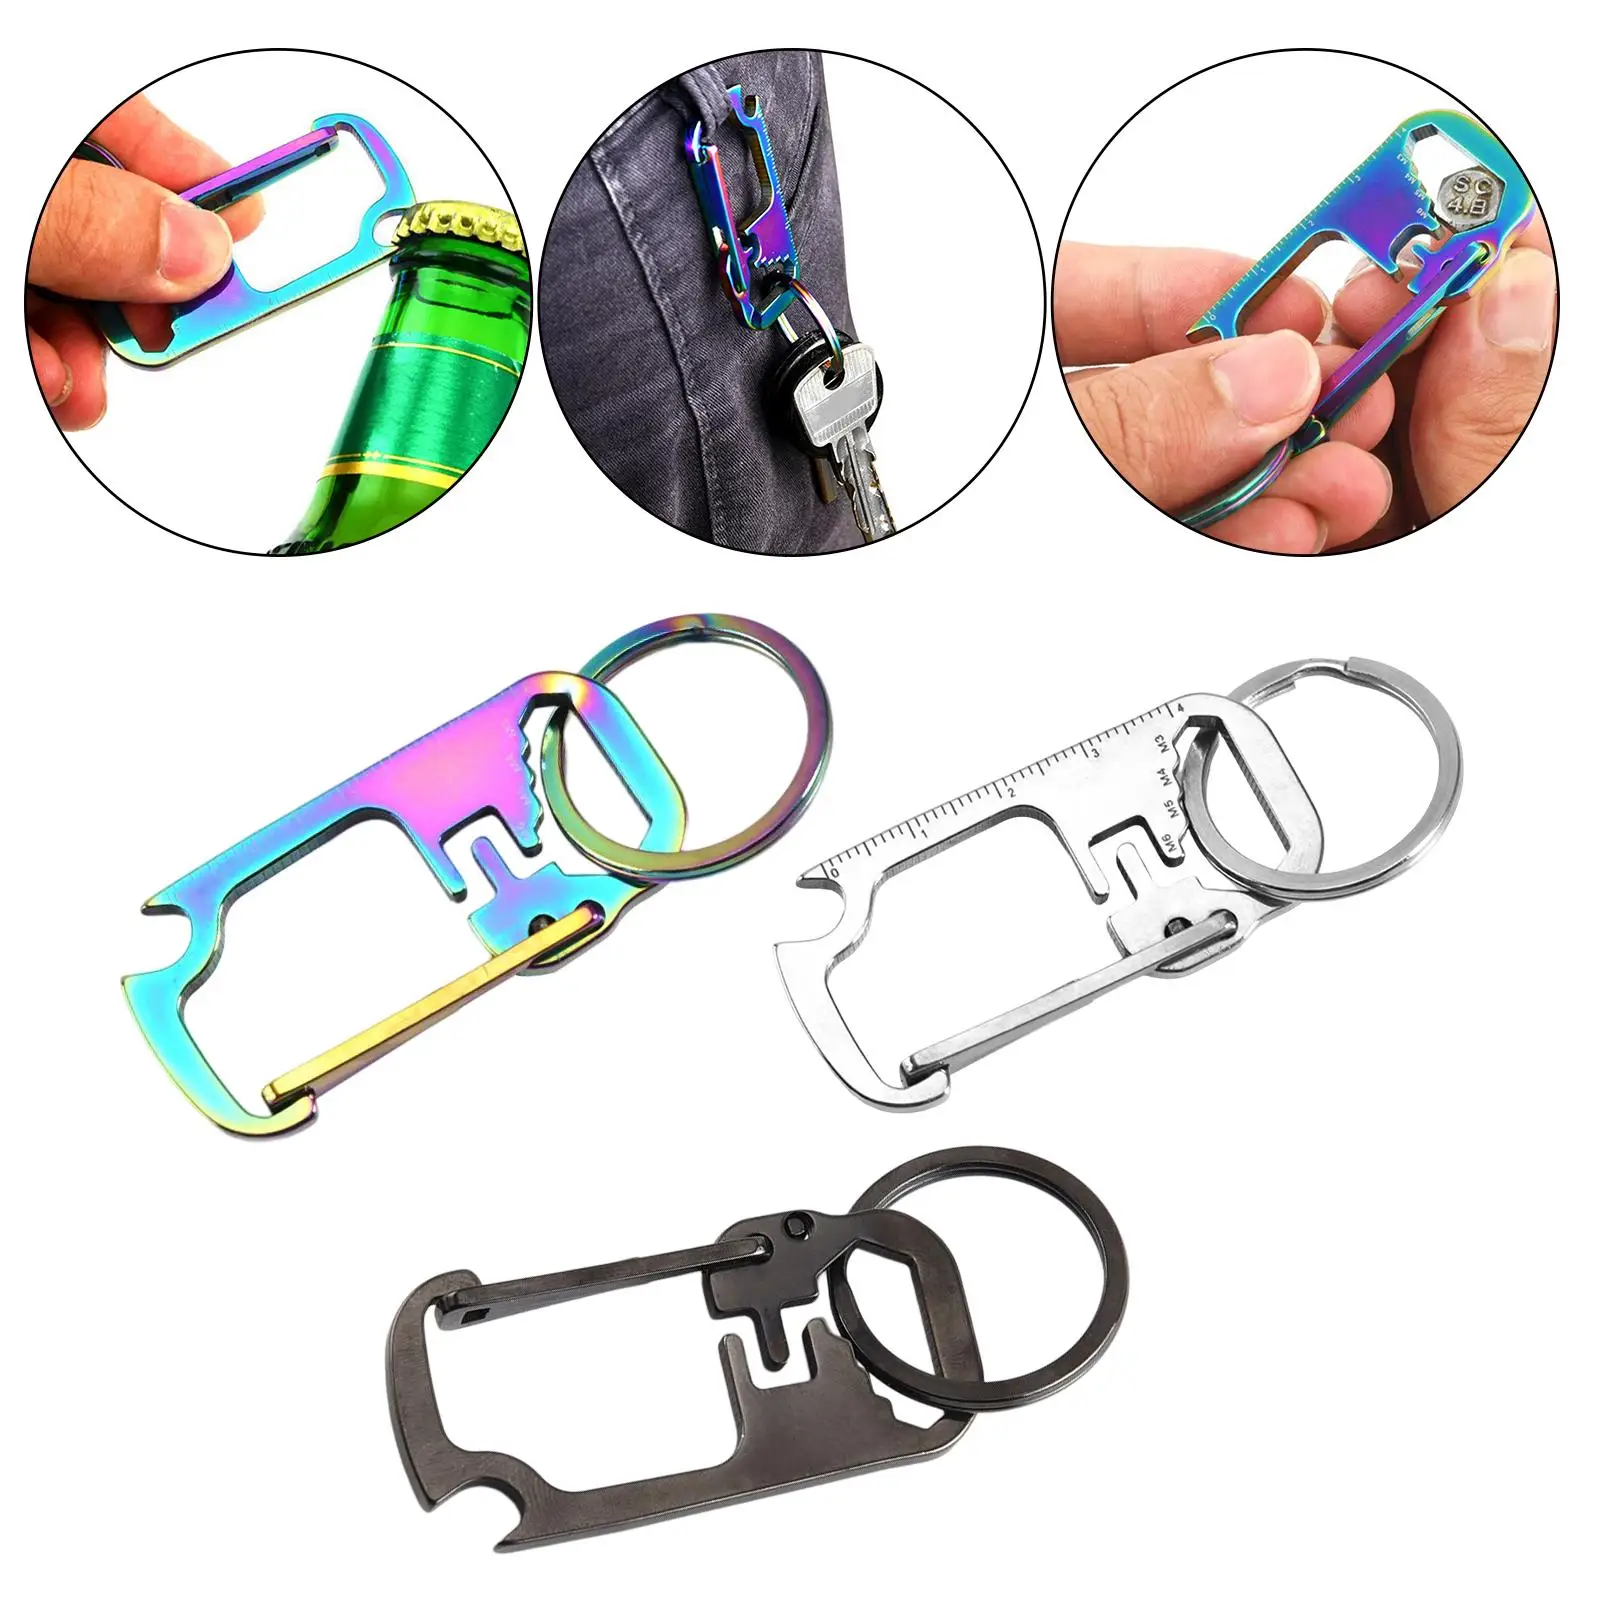 Multifunctional Keychains Multitool Precision Miniature Pocket Tool Gifts Fashion for Birthday Jewelry Making Backpacking Hiking